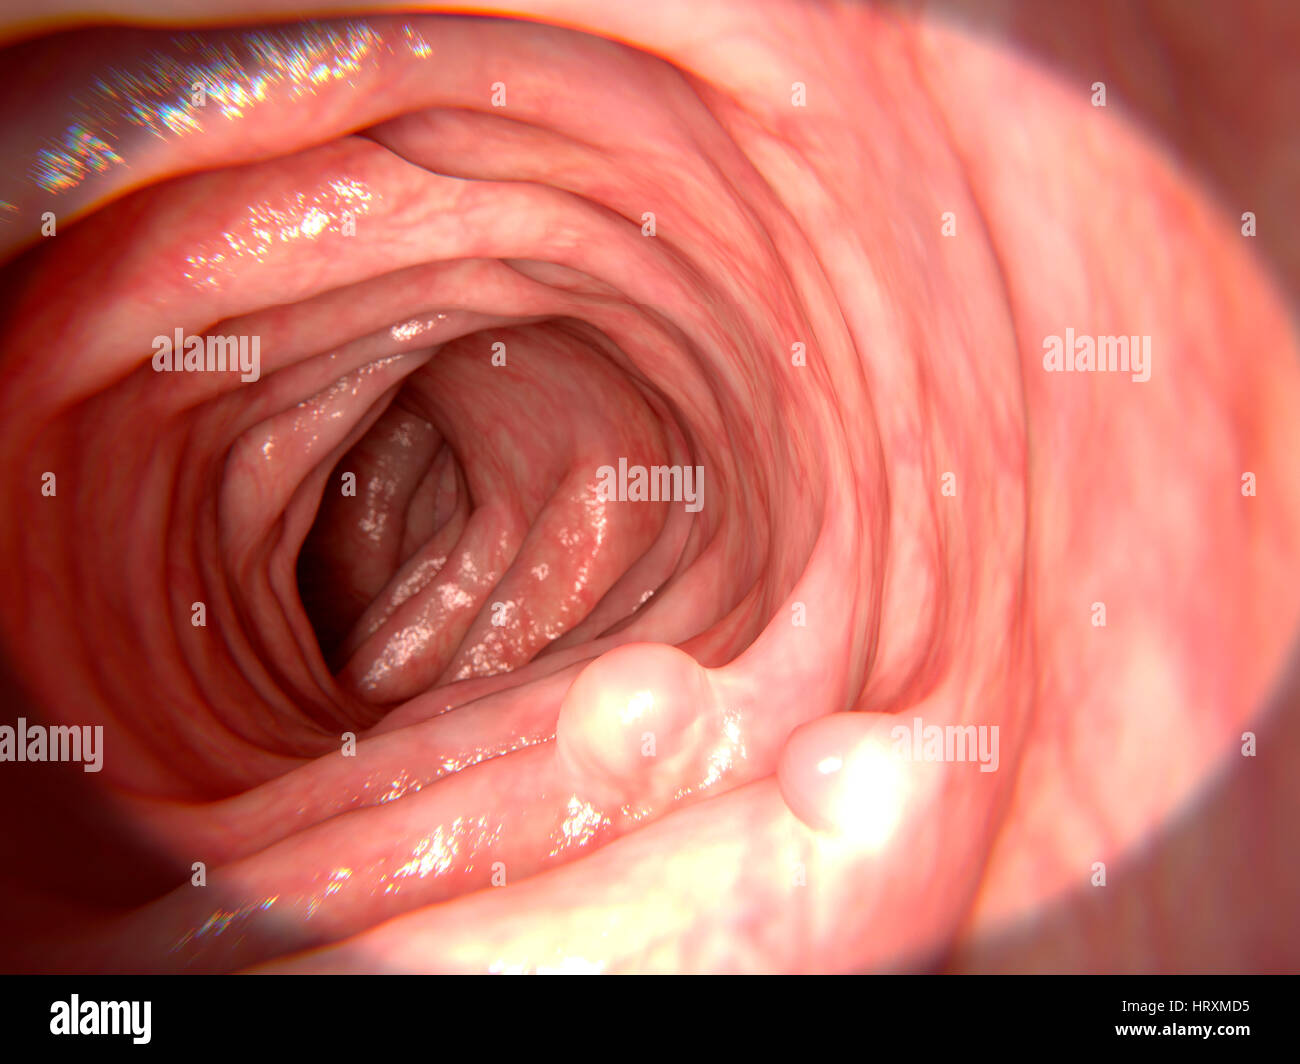 Computer illustration of polyps in the intestine. Polyps are small benign (non-cancerous) growths that arise from the mucus lining of the intestine. Polyps should be surgically removed as they may become malignant (cancerous). Stock Photo